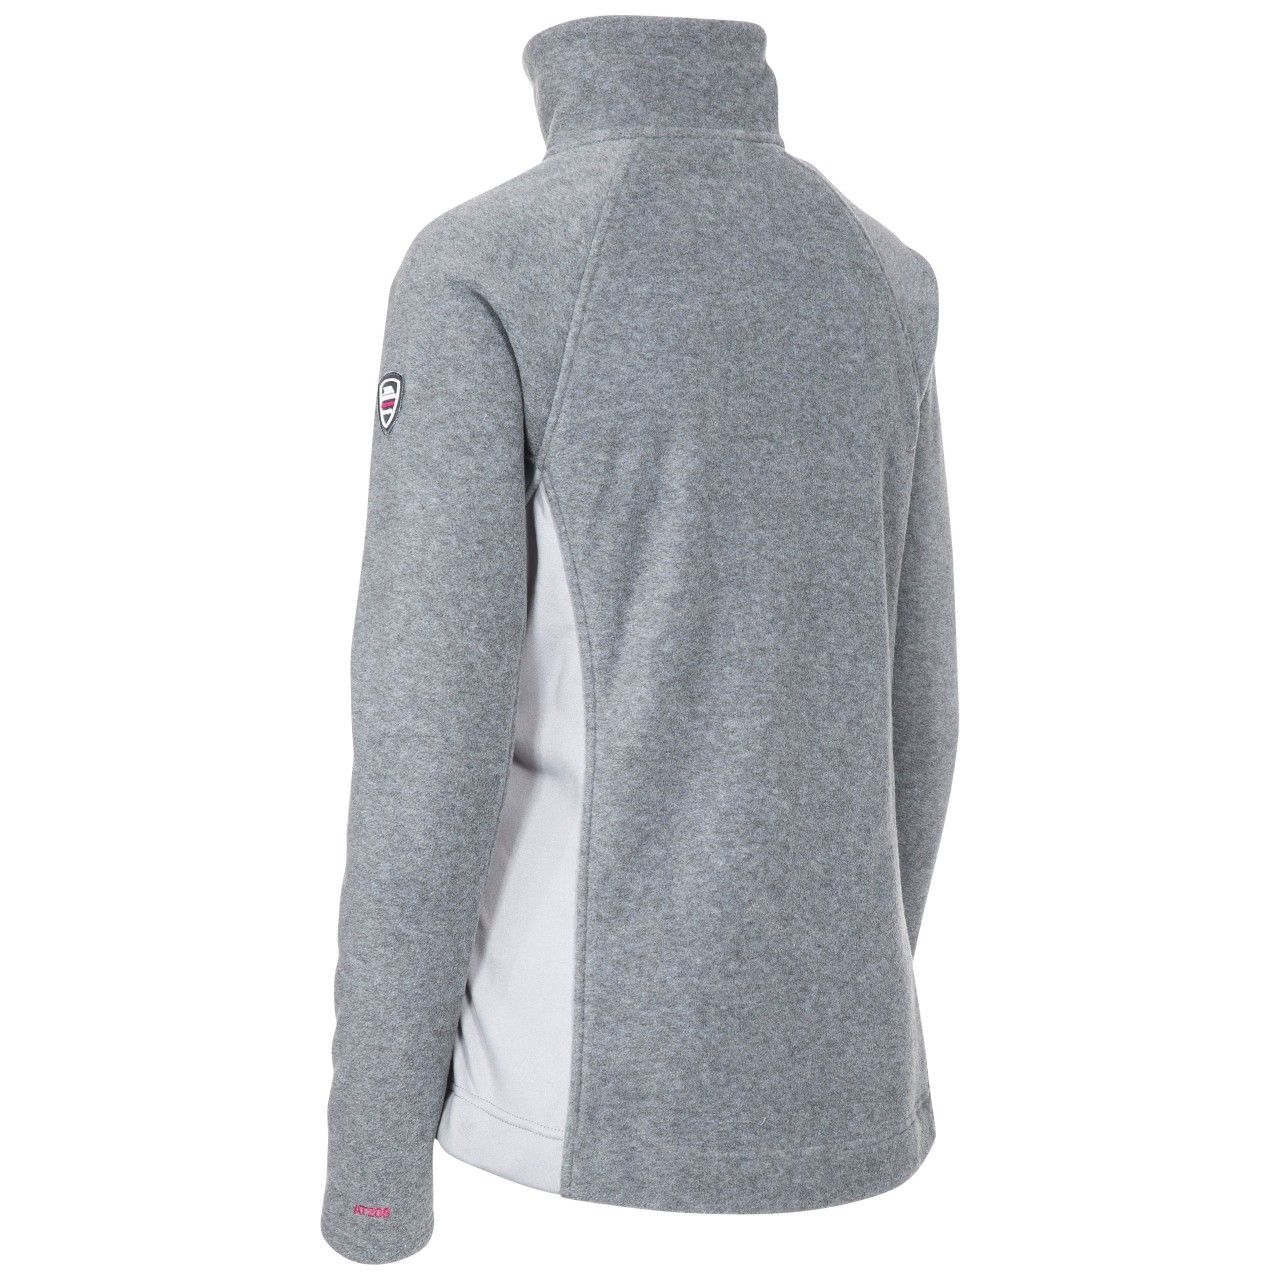 Furry backed fleece. Contrast stretch side panels. Contrast zips. 2 low profile zip pockets with garage. Inner front zip facing. Contrast trims. Airtrap. 100% Polyester. Trespass Womens Chest Sizing (approx): XS/8 - 32in/81cm, S/10 - 34in/86cm, M/12 - 36in/91.4cm, L/14 - 38in/96.5cm, XL/16 - 40in/101.5cm, XXL/18 - 42in/106.5cm.